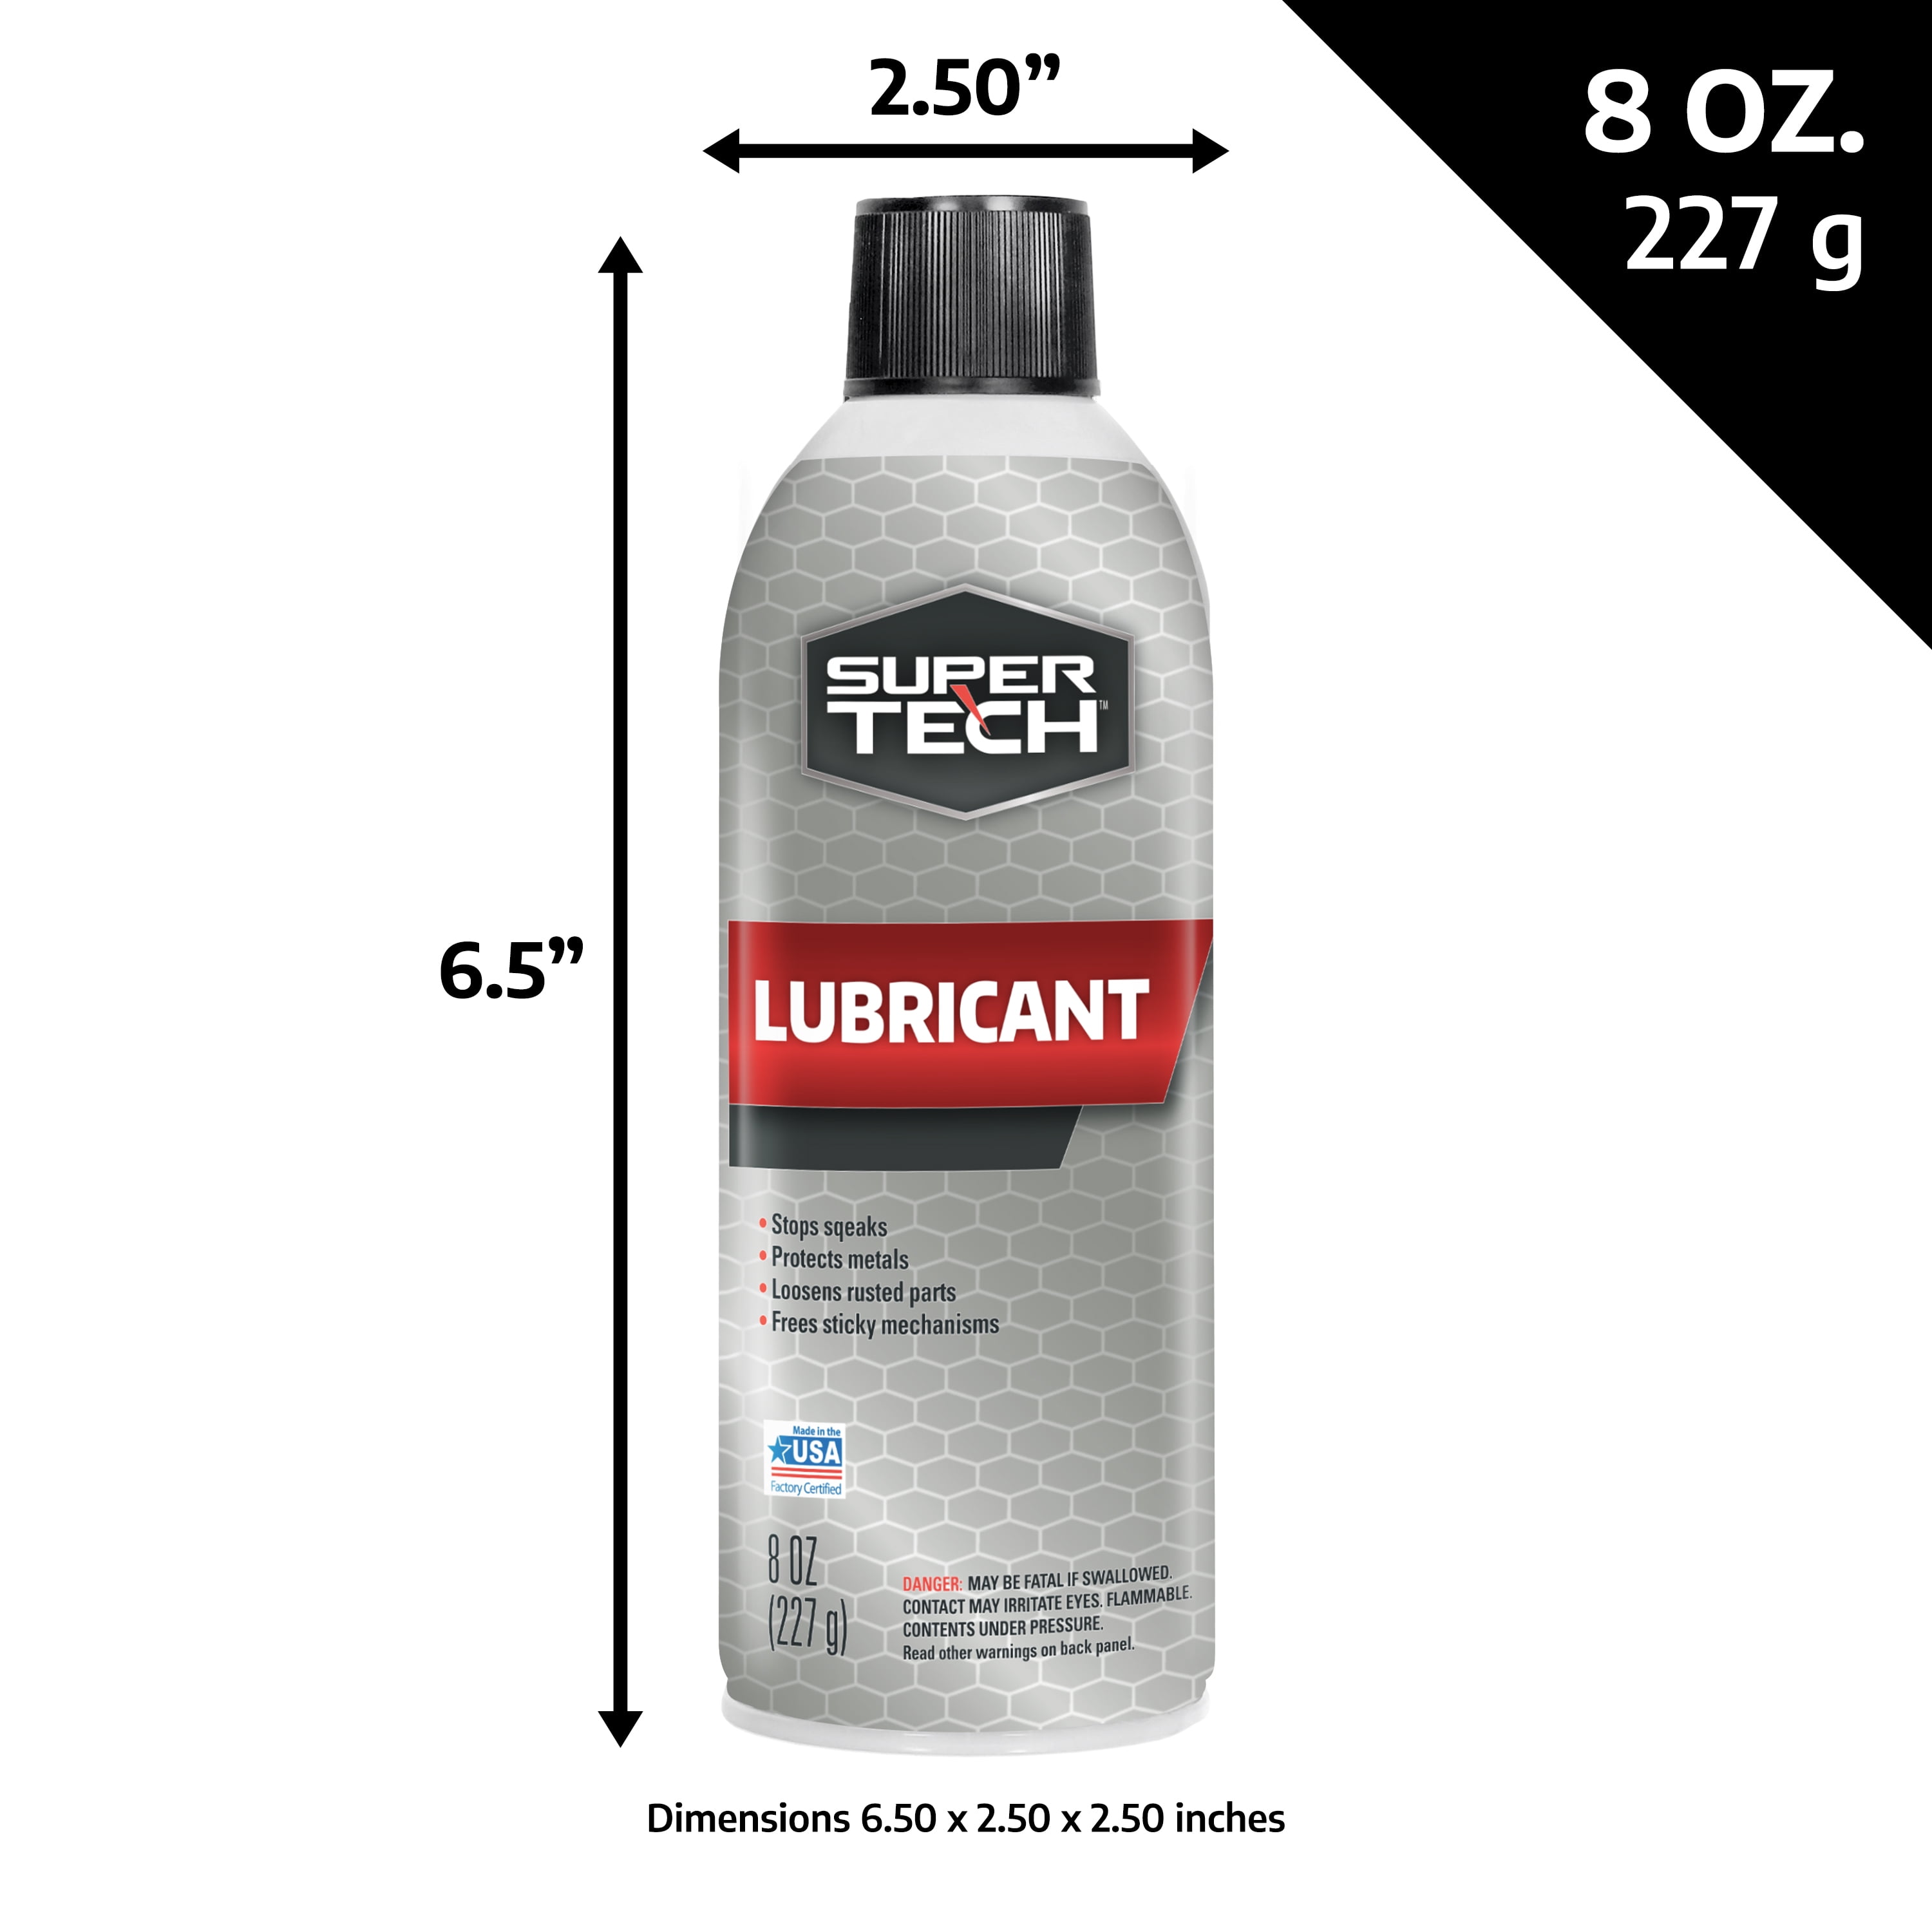 Factory Chain Lube Silicone Anti Rust Lubricant Spray for Car